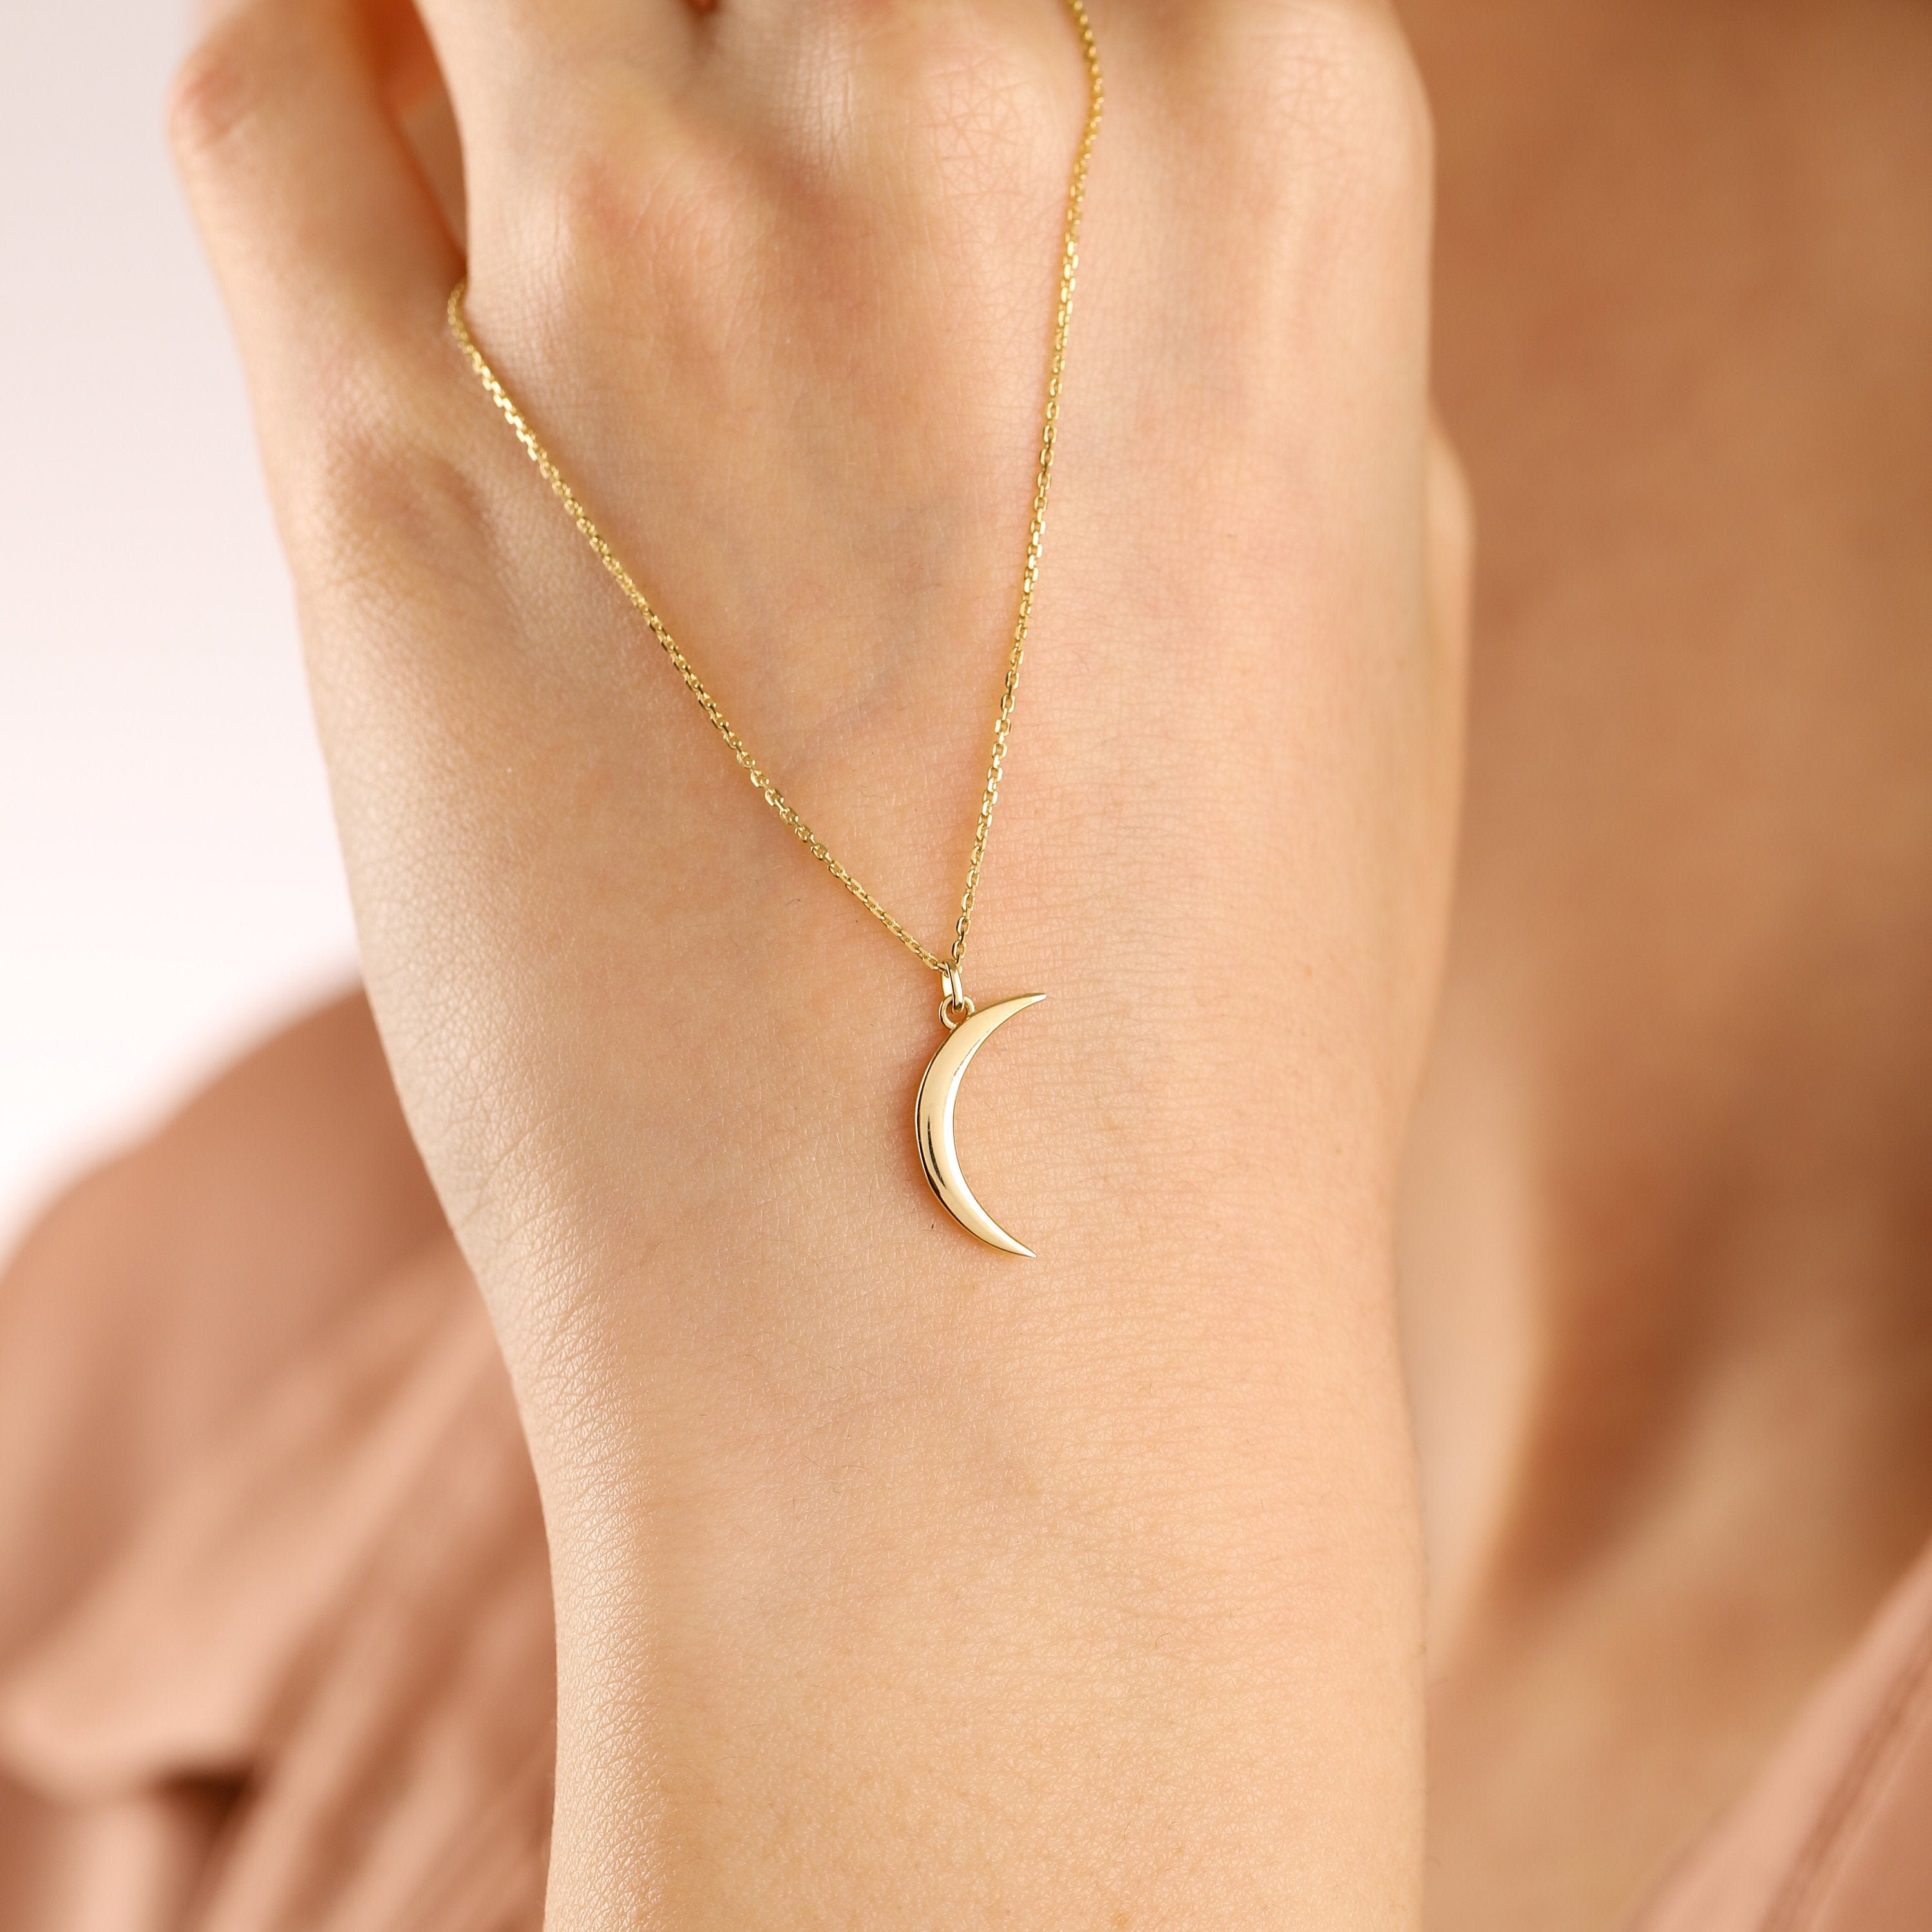 Crescent Moon Key Necklace - Large  Fine jewelry solid silver gold-finish  necklaces bracelets earrings